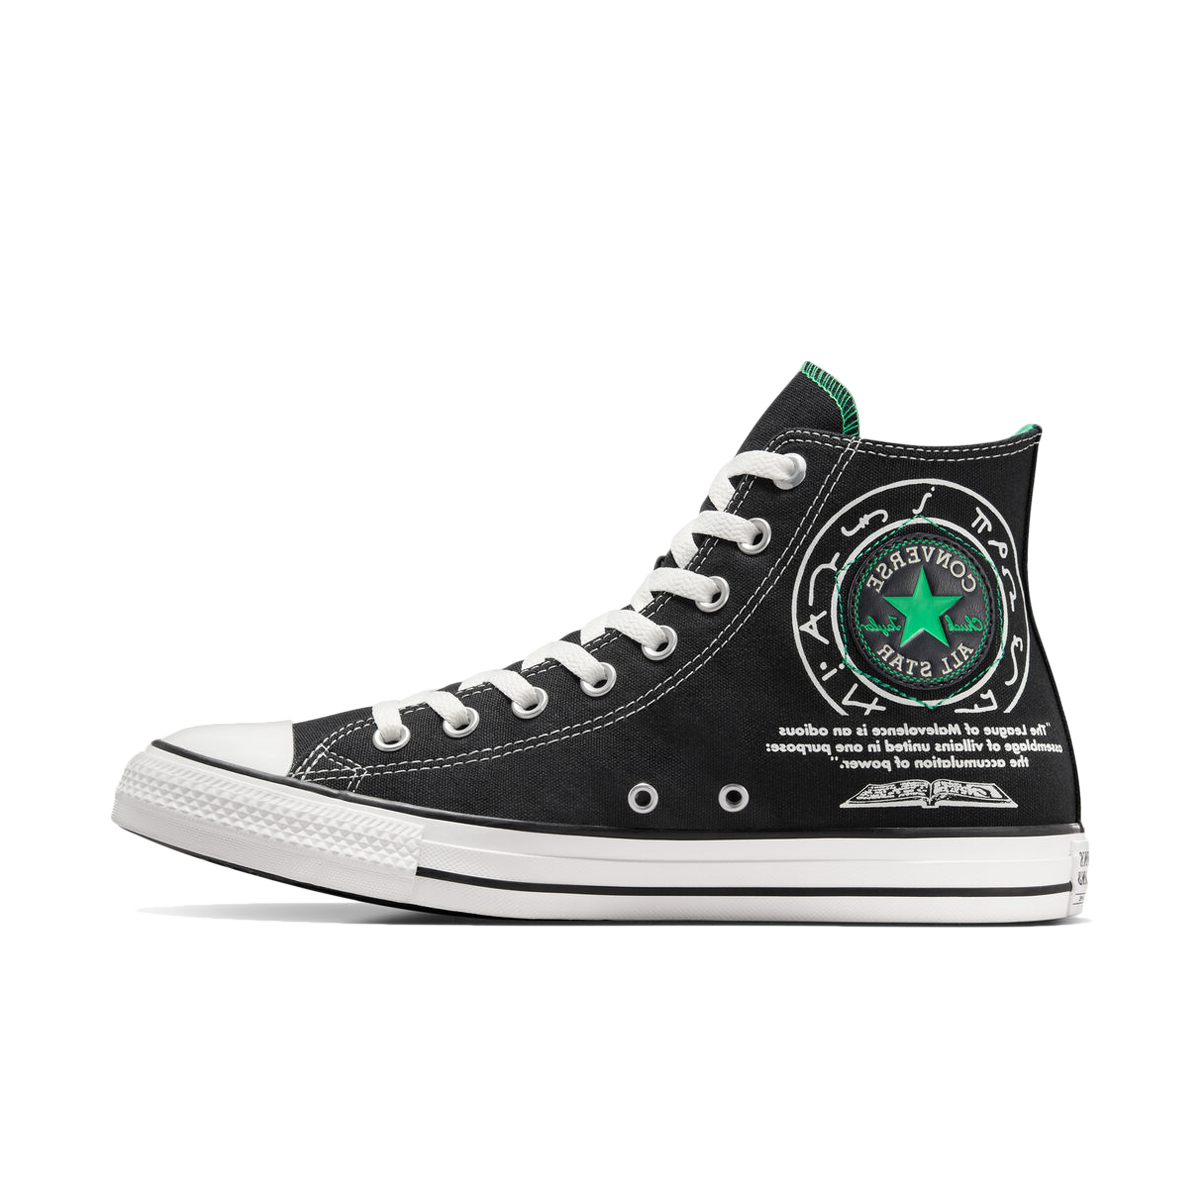 Dungeons & Dragons x Converse Chuck Taylor All Star 'League of Malevolence'